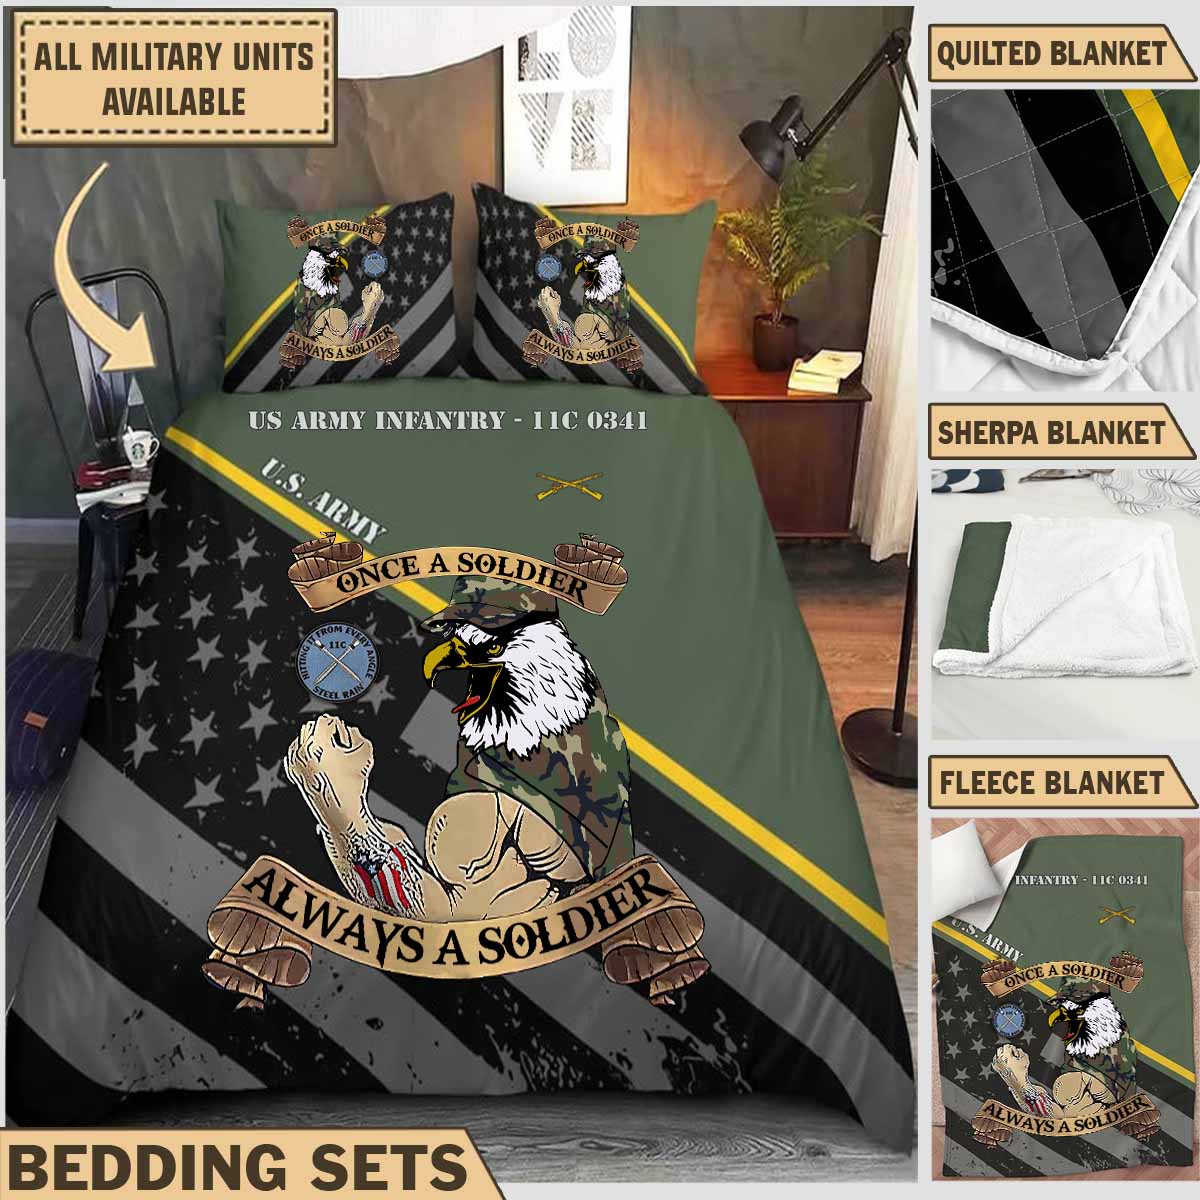 us army infantry 11c 0341bedding collection mybuh